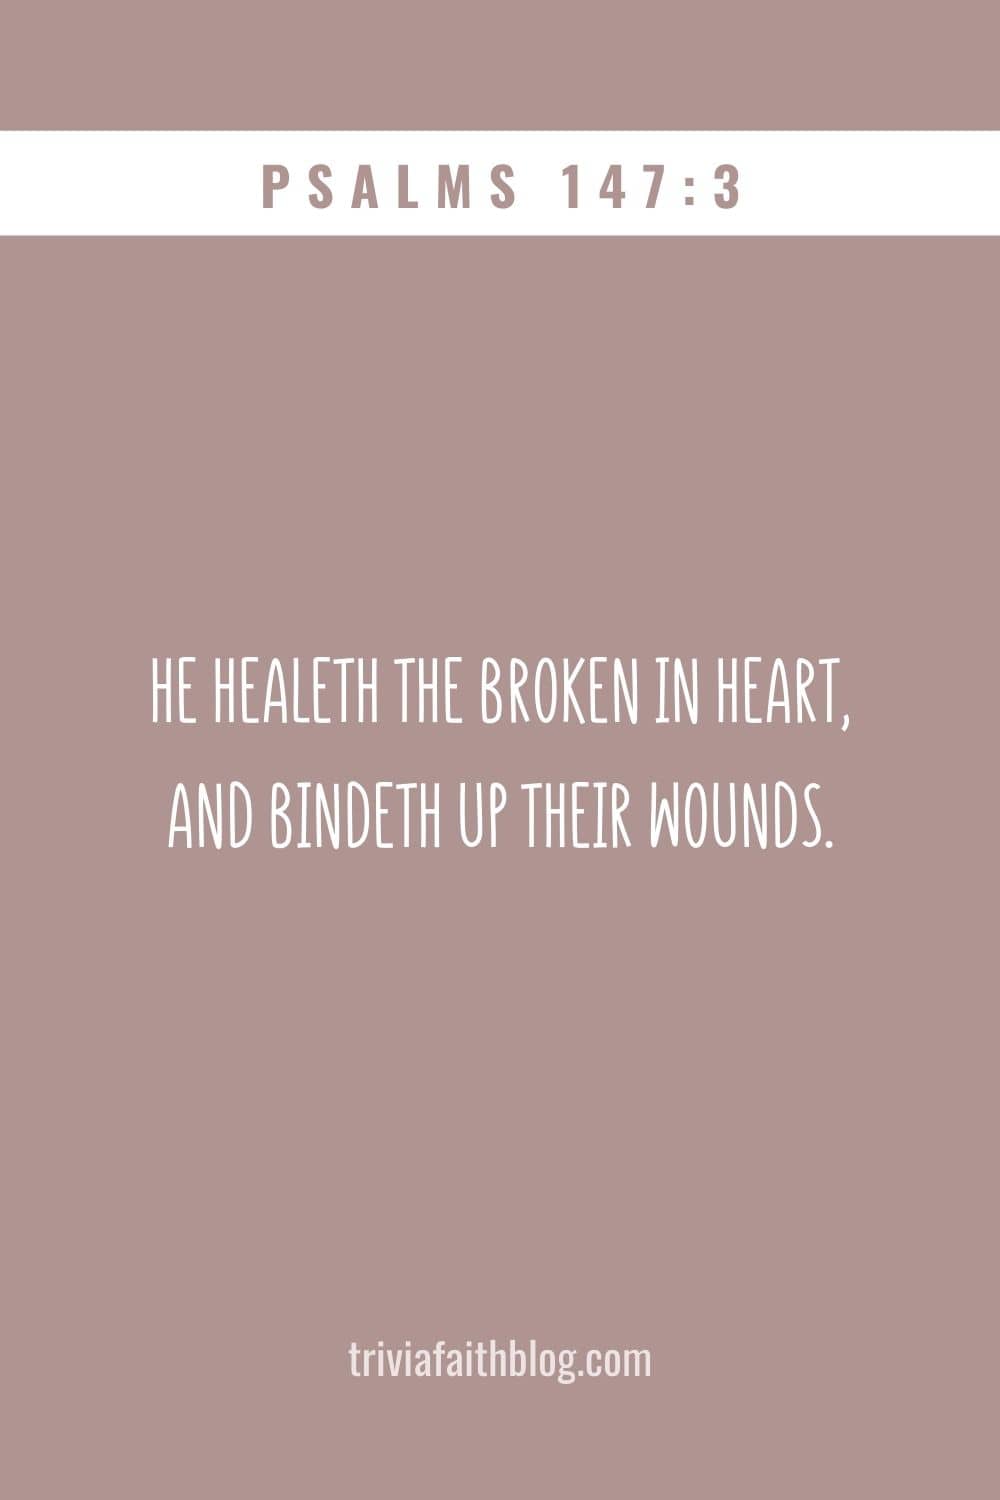 He healeth the broken in heart, and bindeth up their wounds